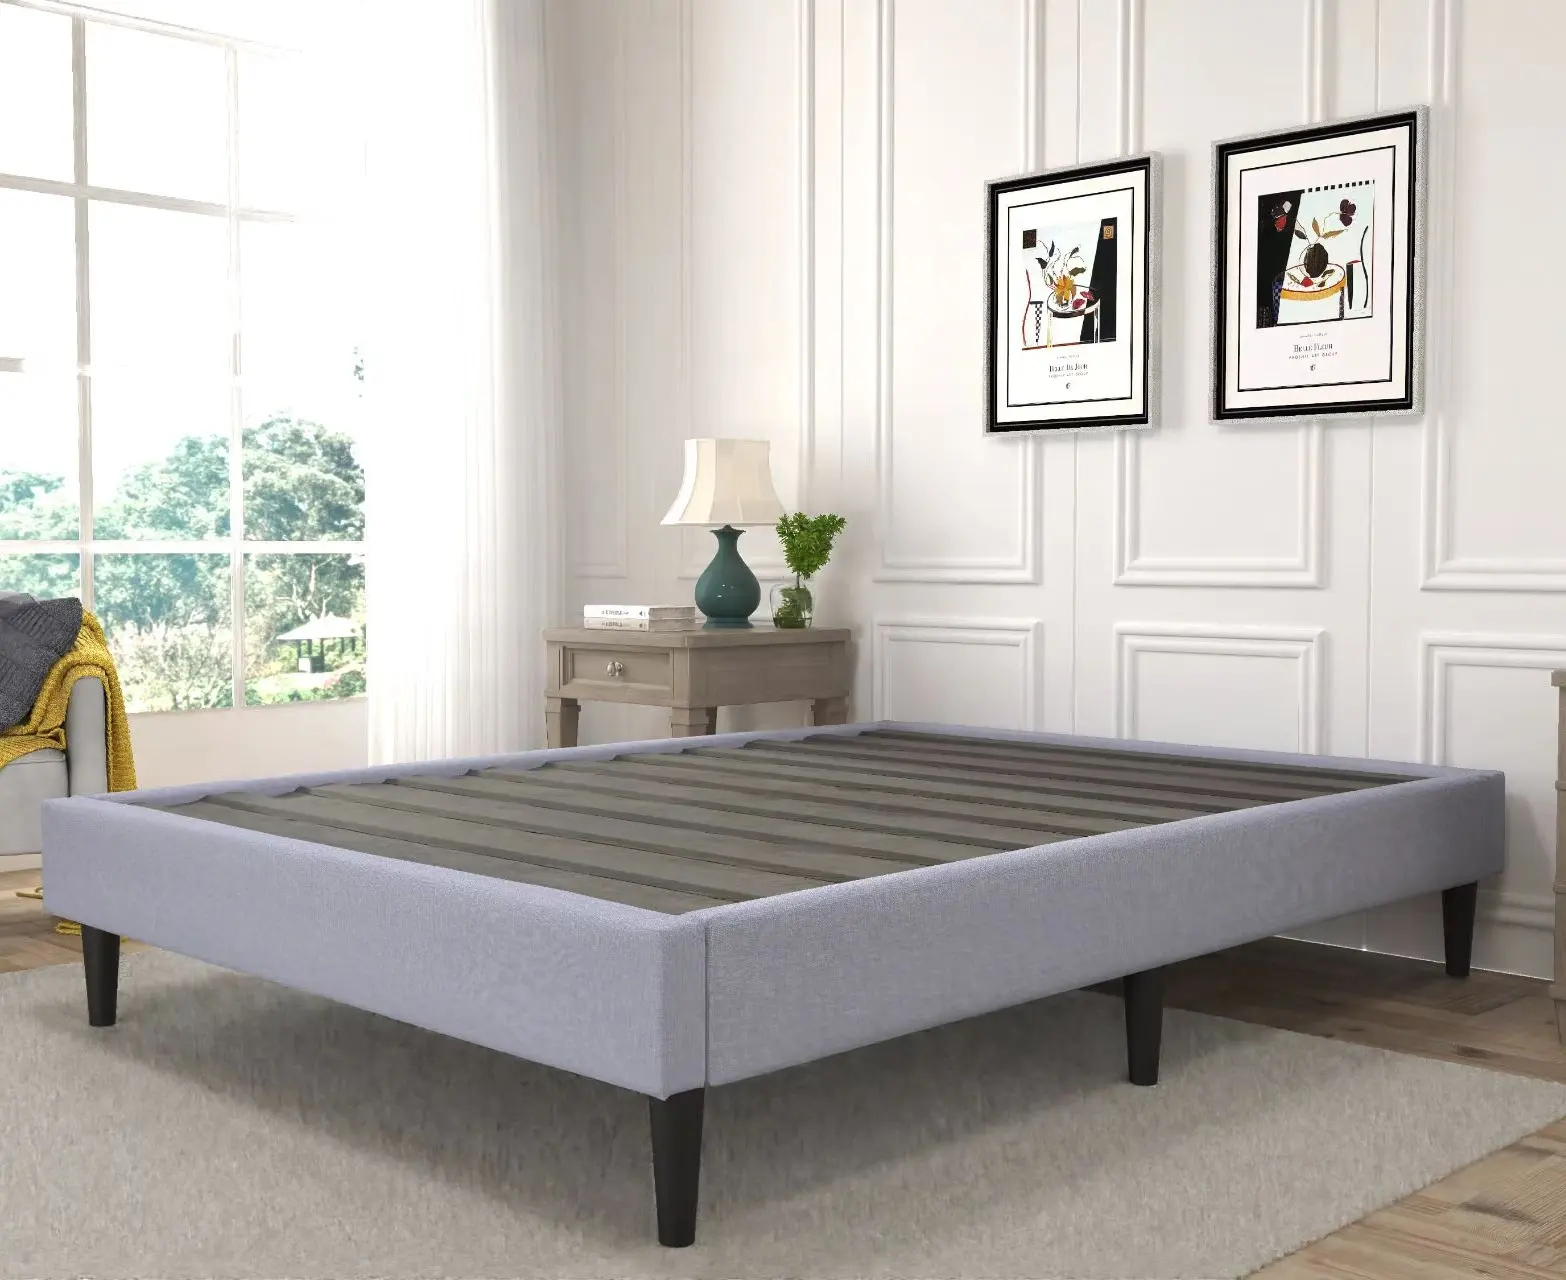 Custom Color Bed Design No Box Spring Needed Wood Queen Size And Single Platform Bed Frame Without Headboards